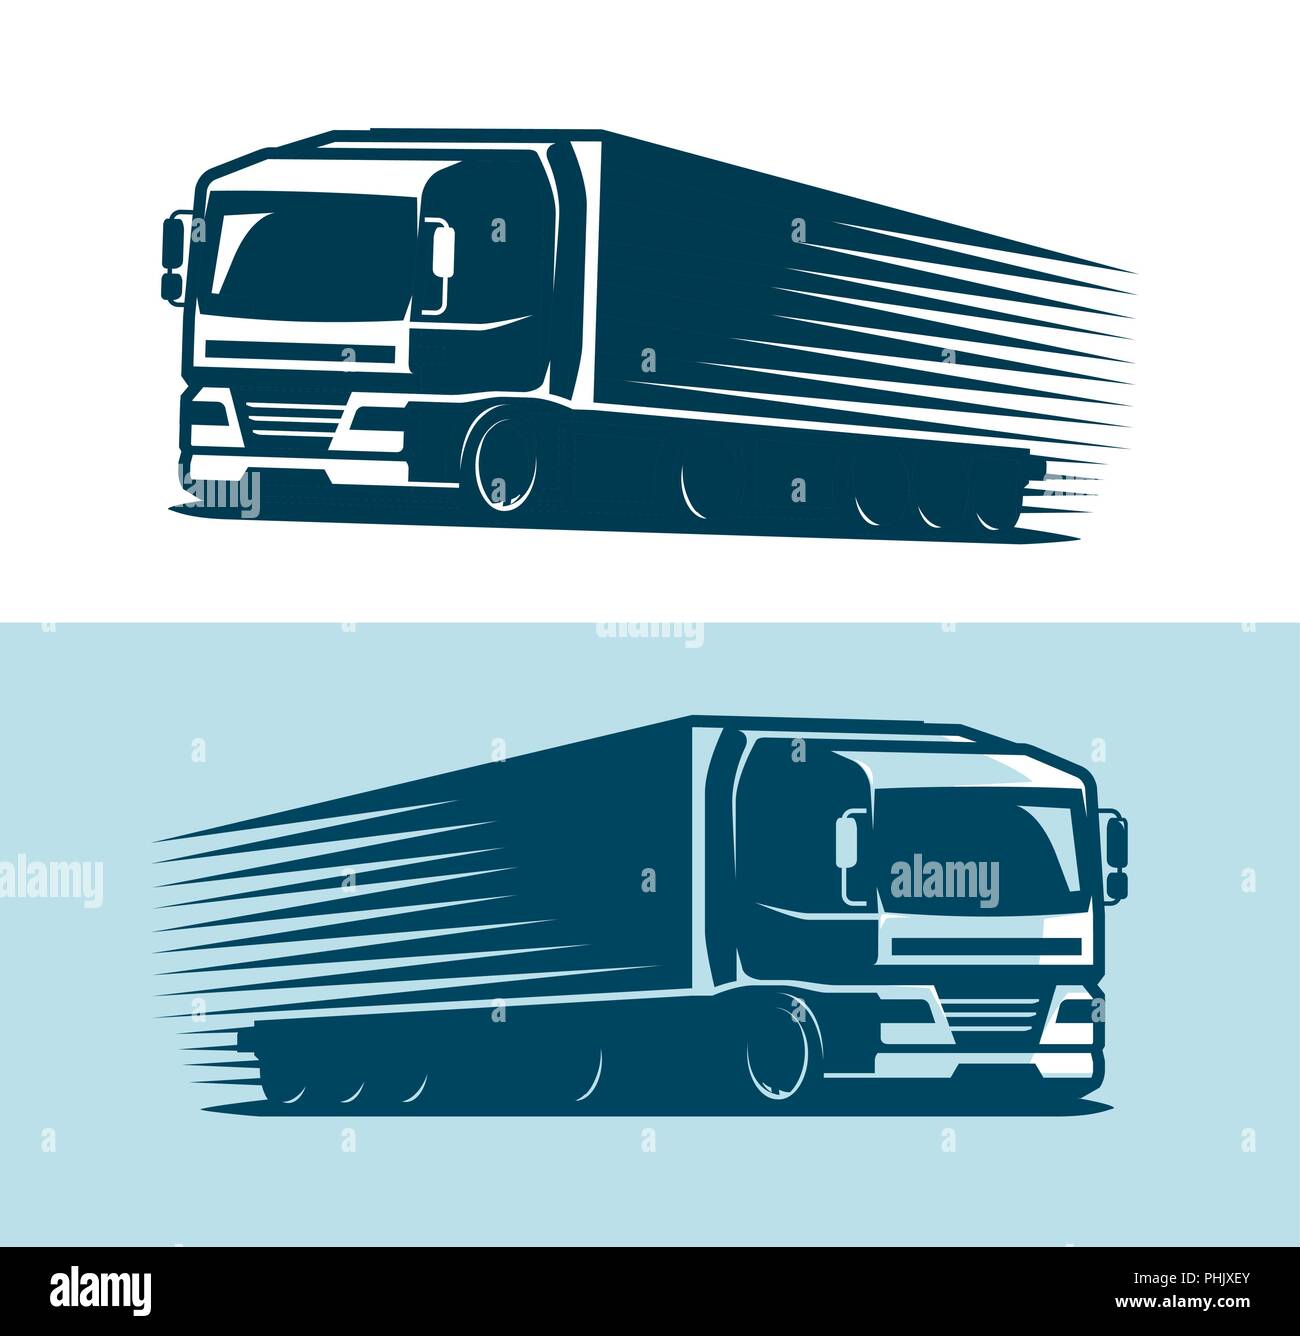 Truck, lorry logo or label. Trucking, delivery symbol. Vector illustration Stock Vector